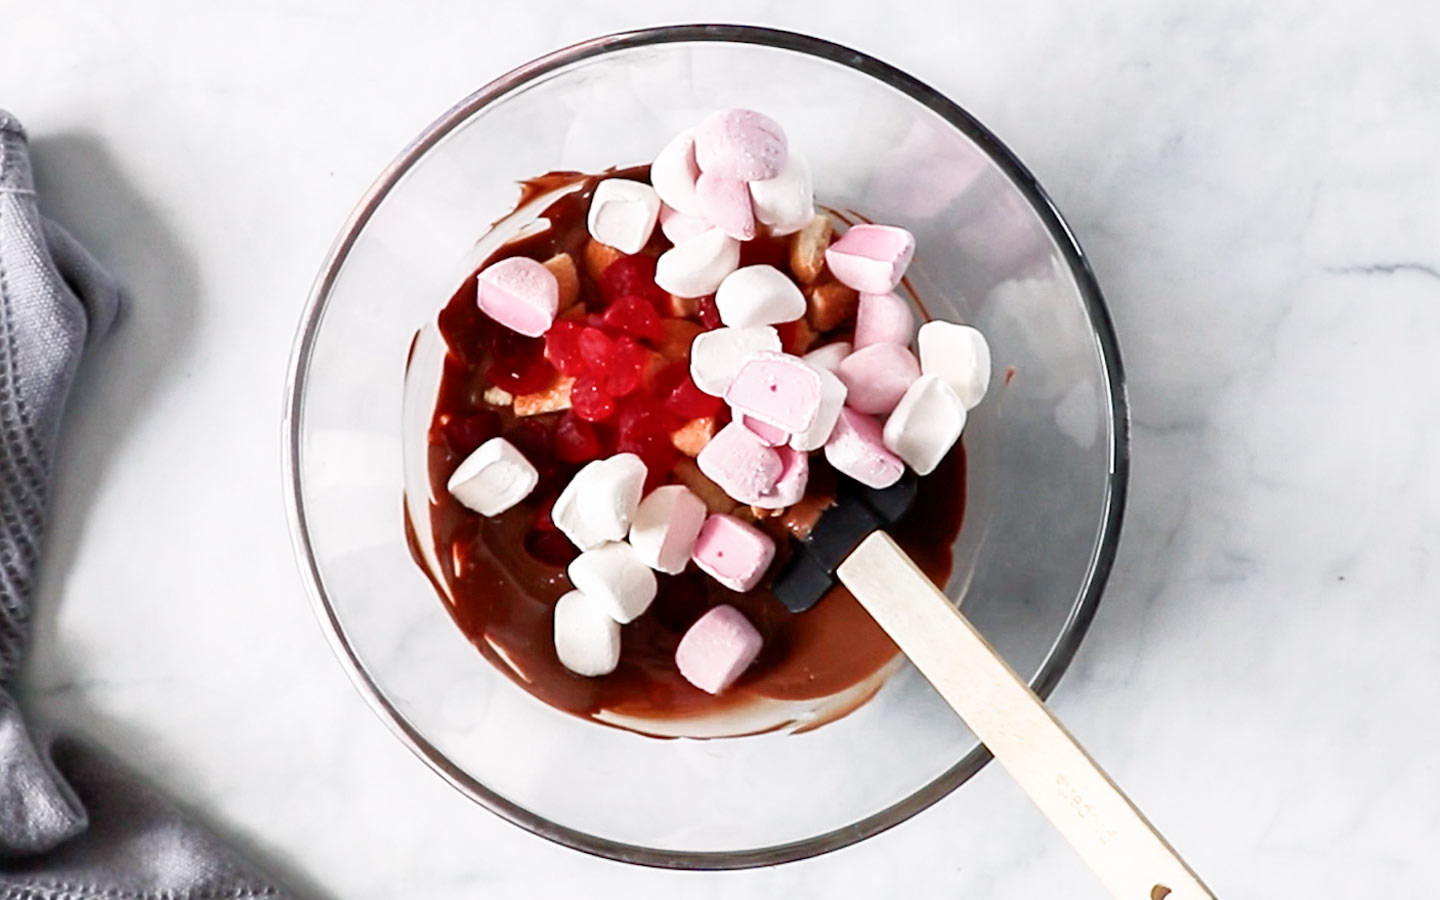 Rocky road ingredients in a bowl.